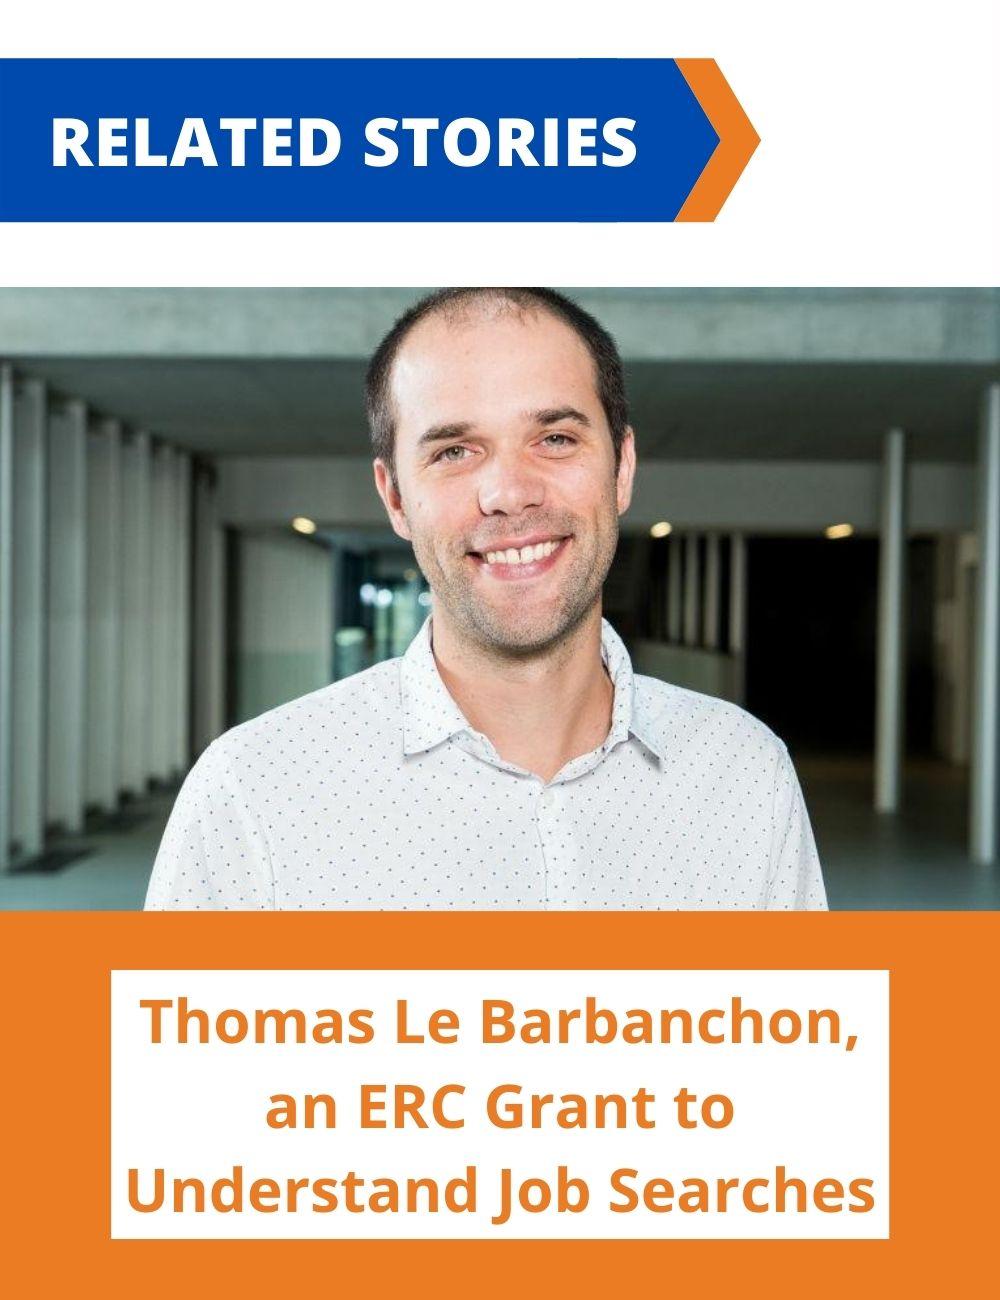 Image: Thomas Le Barbanchon smiling. Link to related stories. Story headline: Thomas Le Barbanchon, an ERC Grant to Understand Job Searches